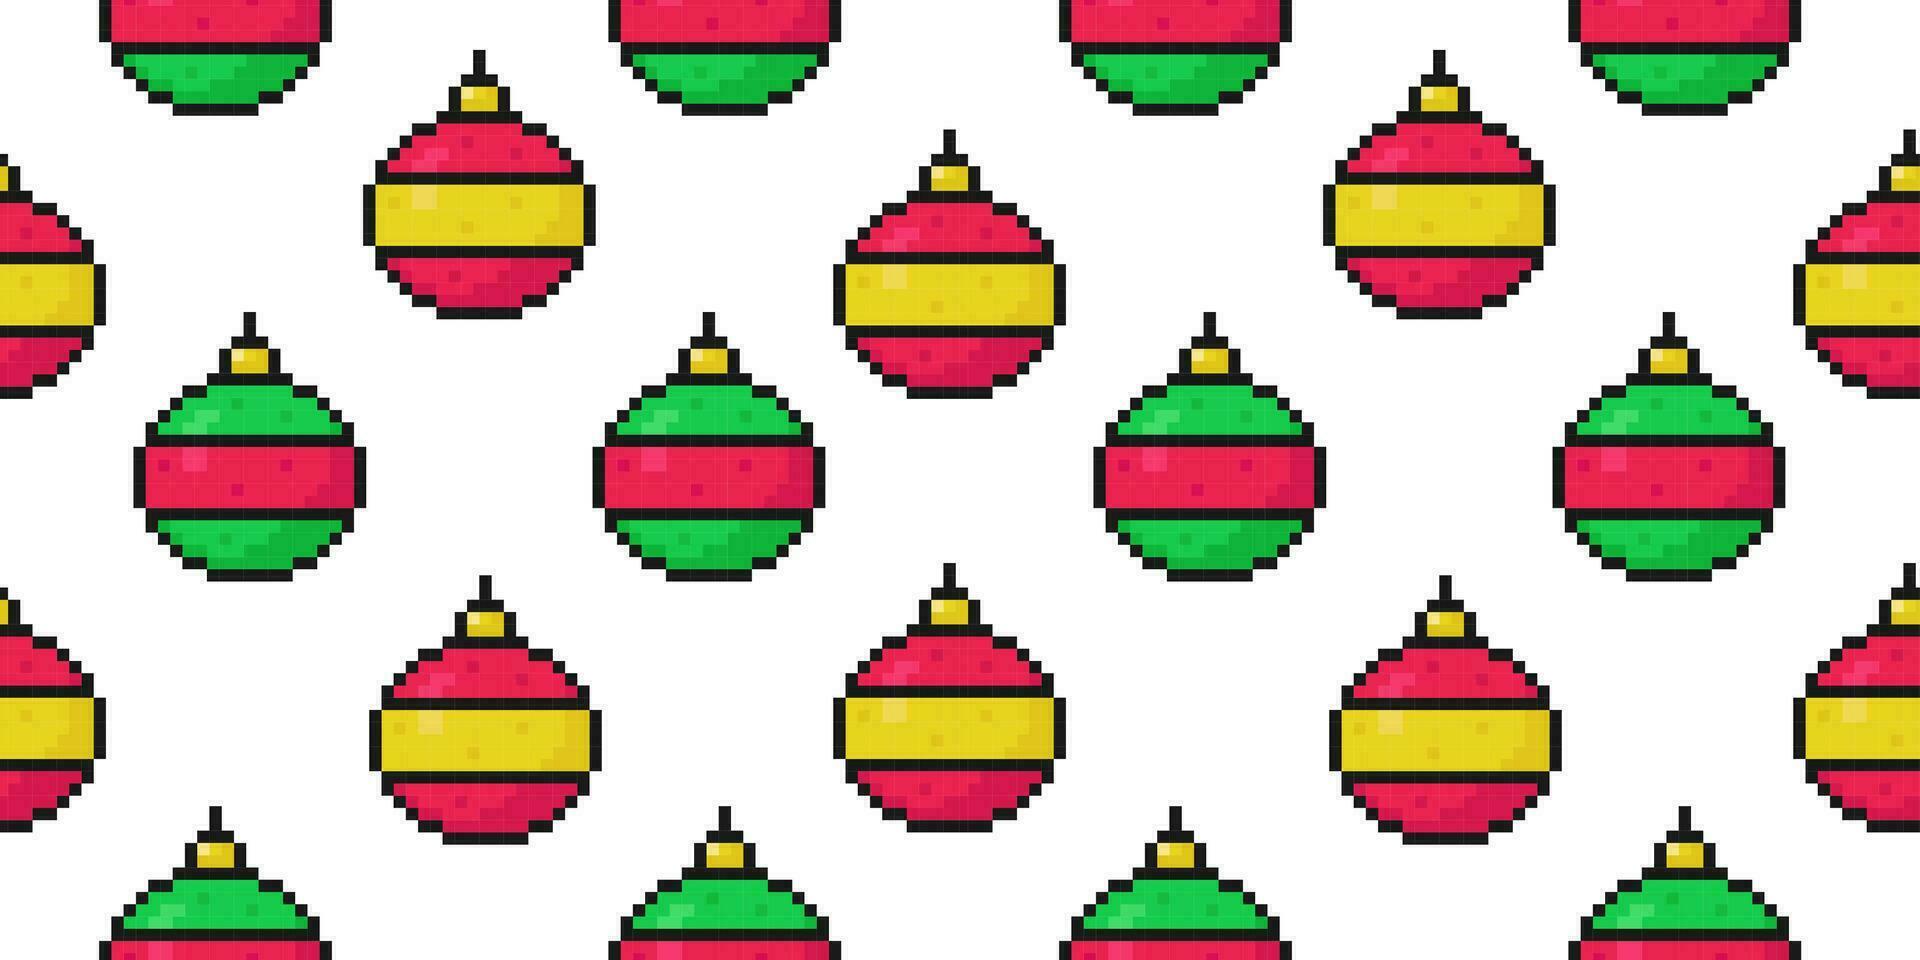 christmas pixel balls pattern, new year celebration, holiday cover, seamless pattern for wrapping, backgrounds, phone case and more, vector illustration